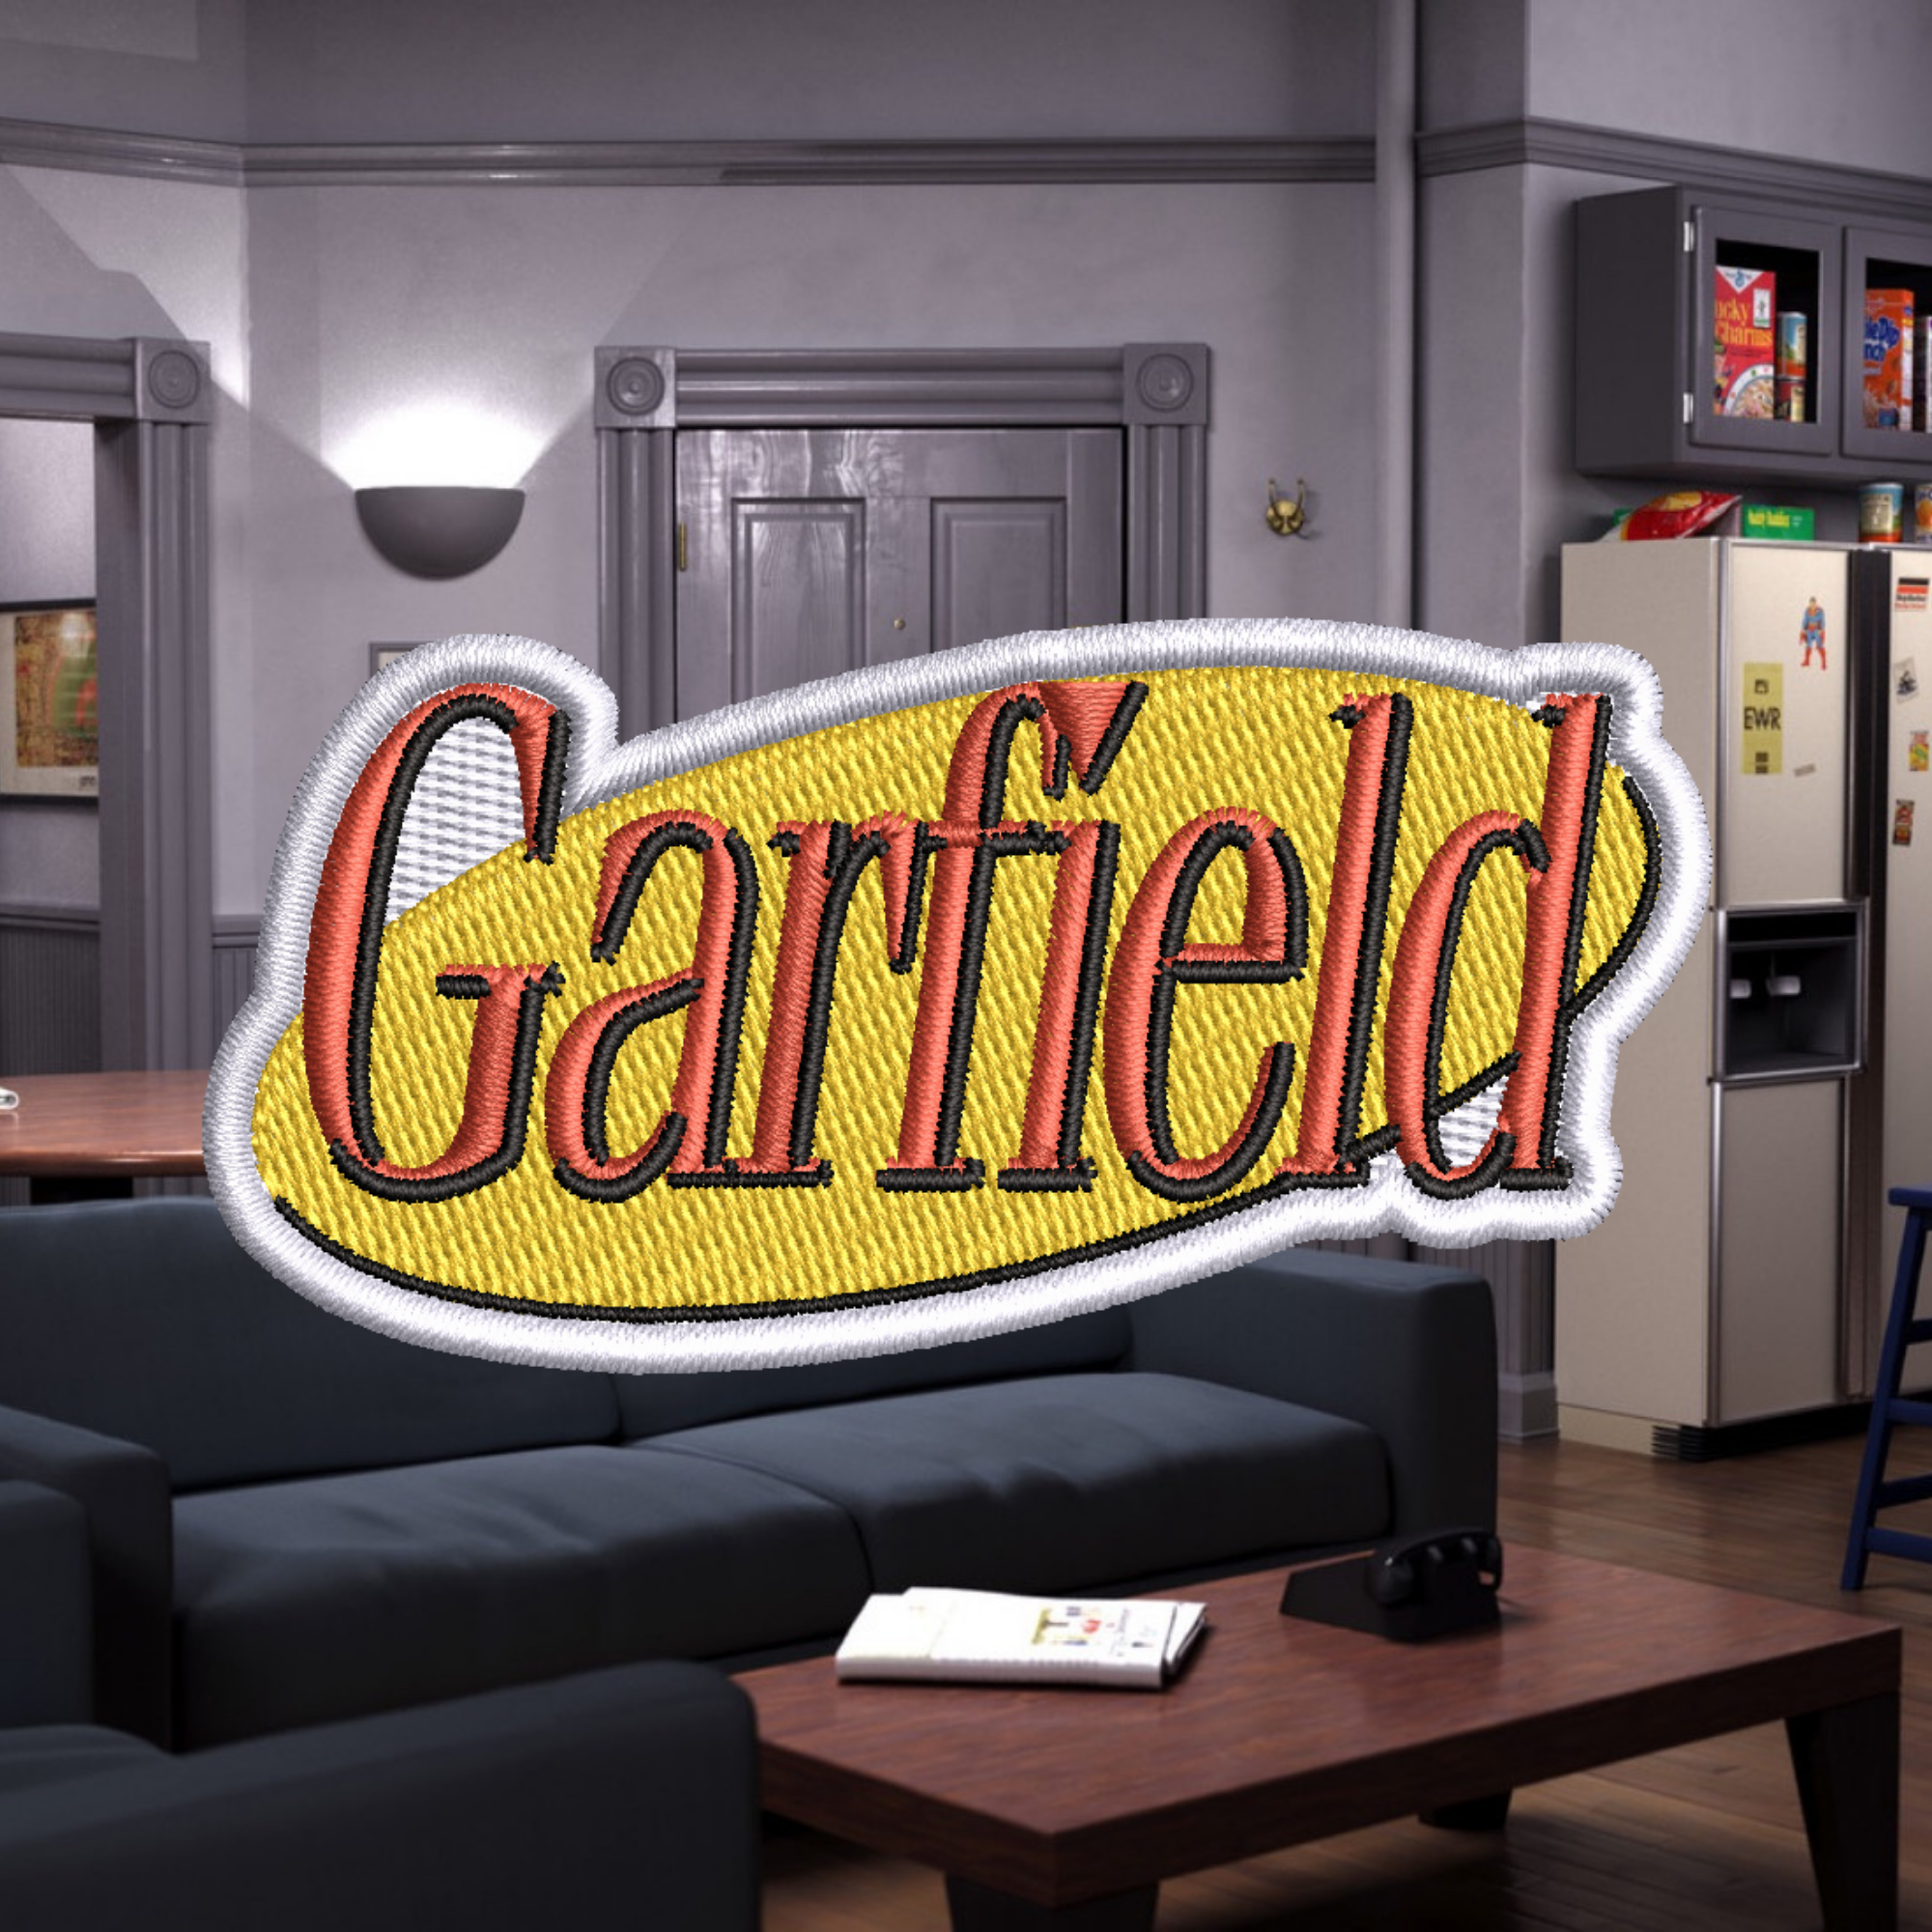 Garfield Seinfeld Crossover Episode Embroidered Iron-on Patch